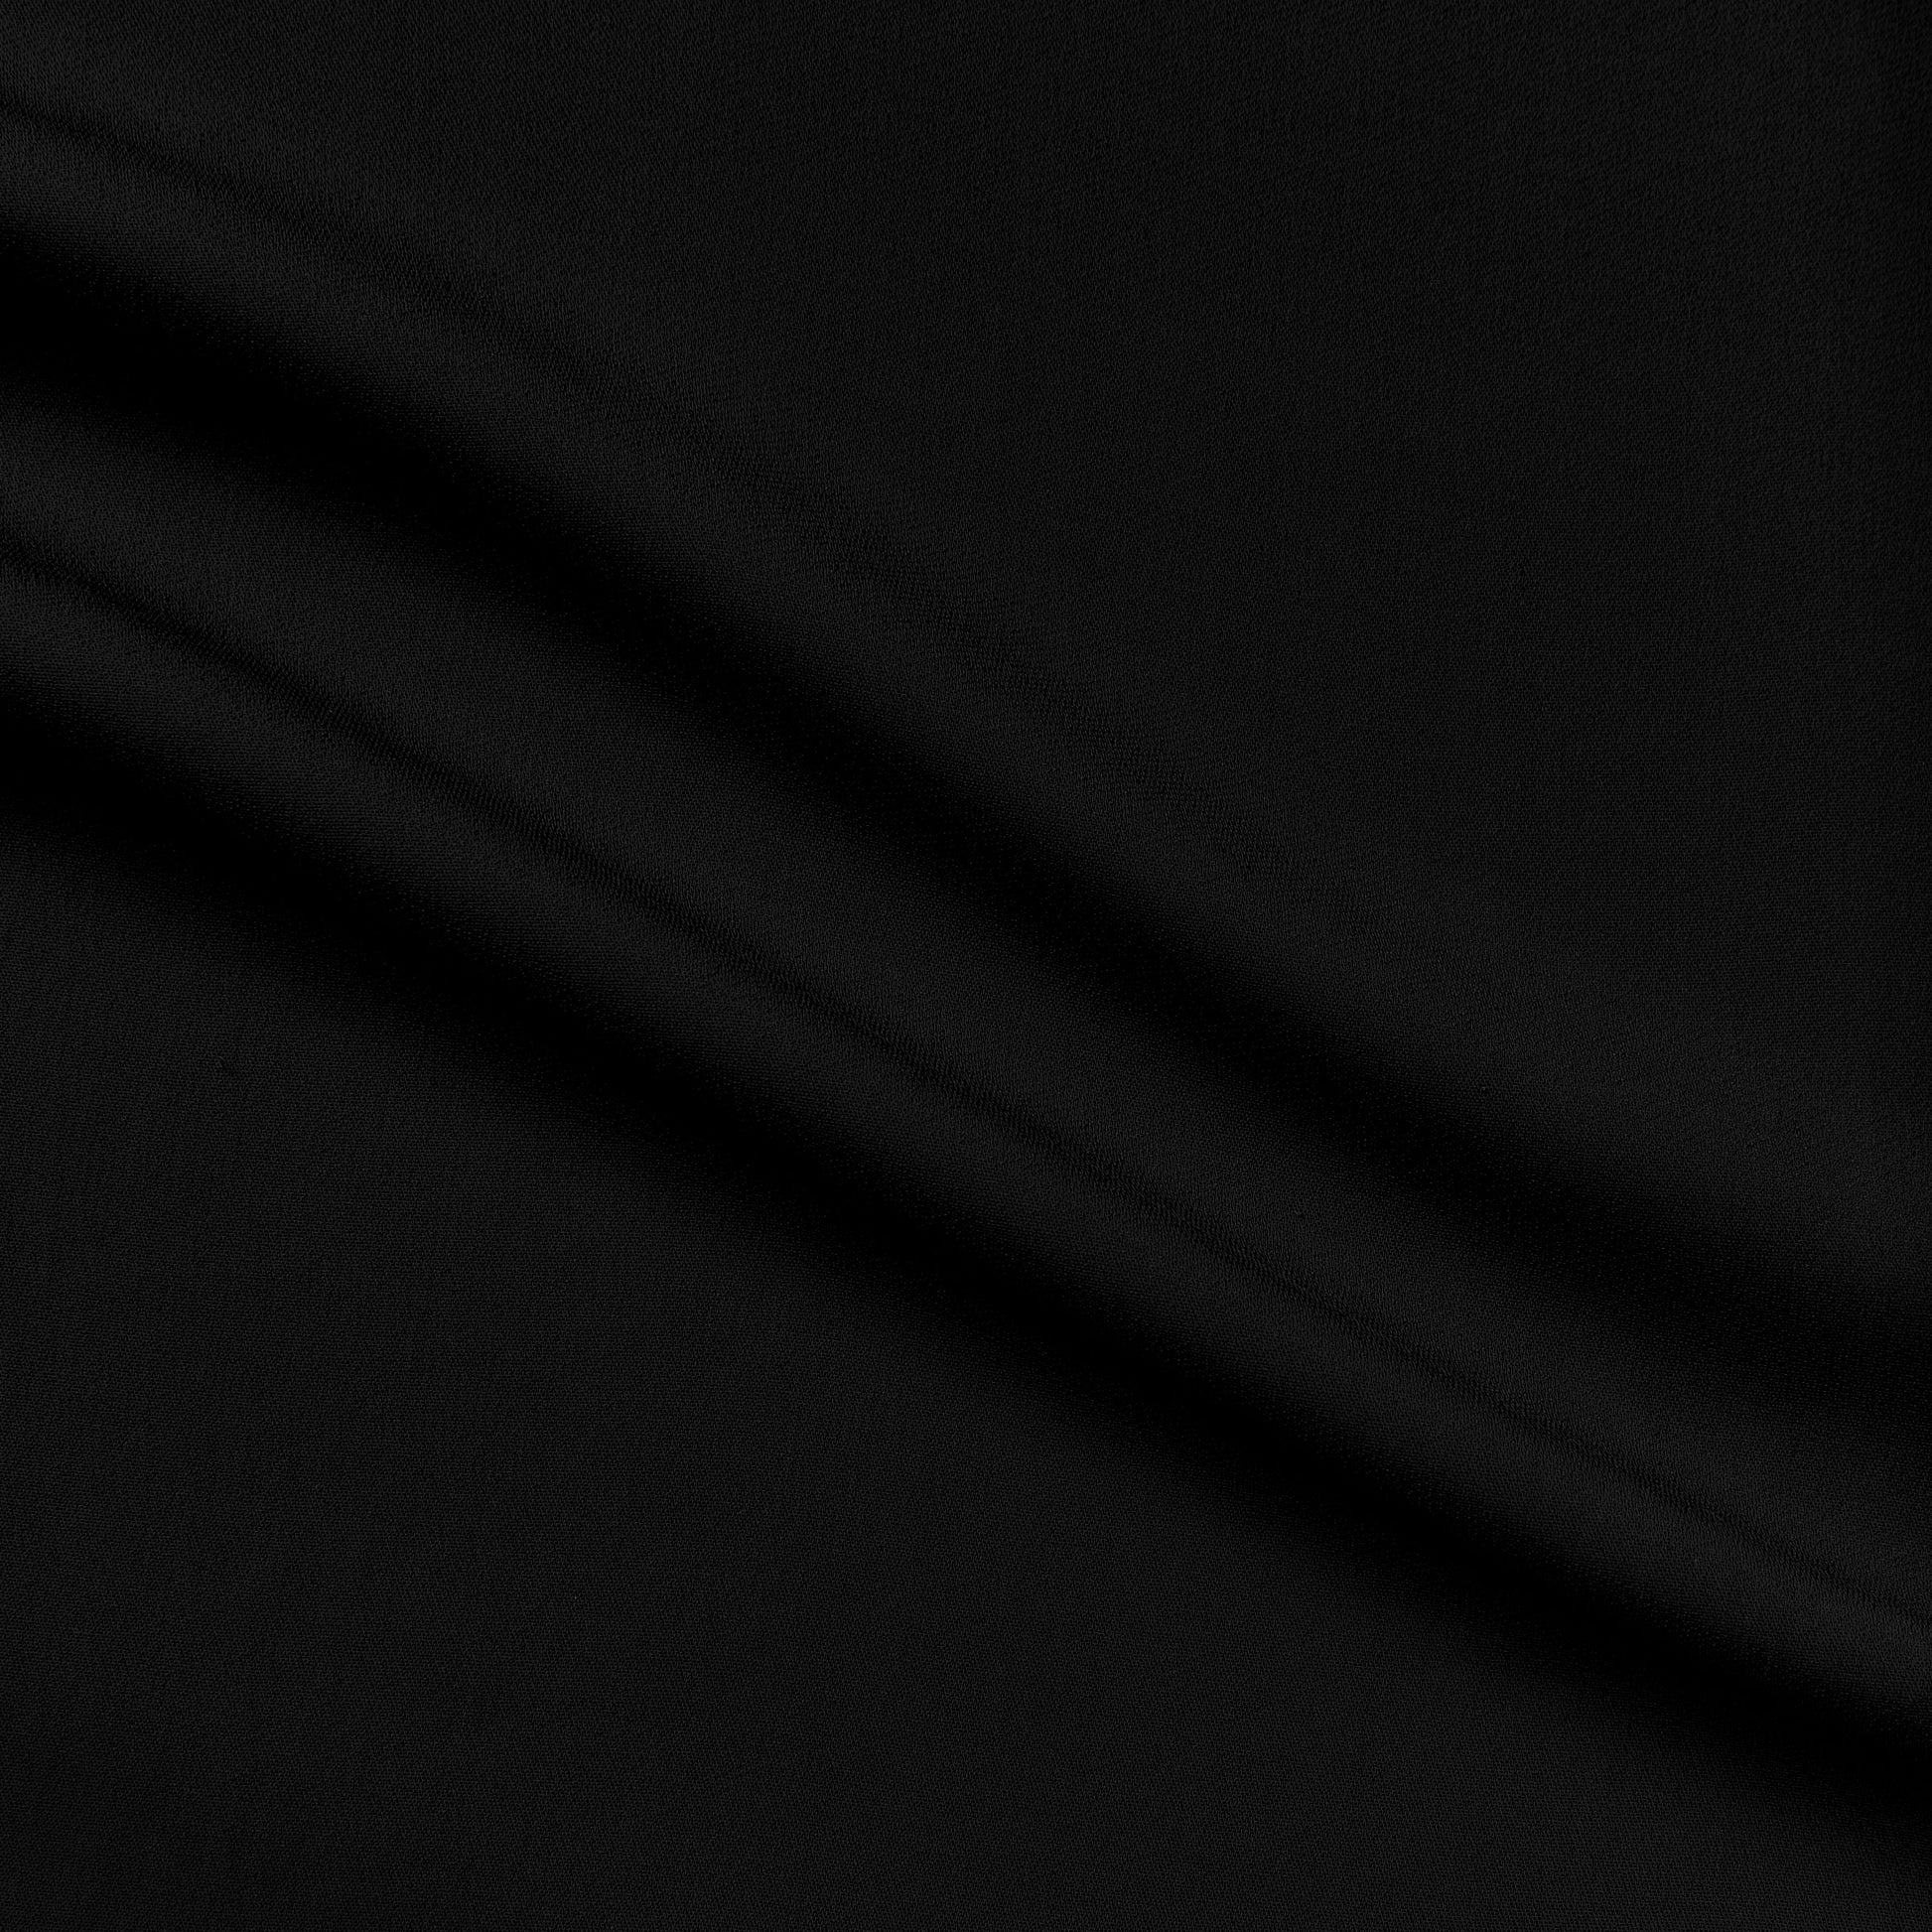 imagine presenting the black color version of a stretch mid weight viscose and lycra with a natural silk like sheen and good drape